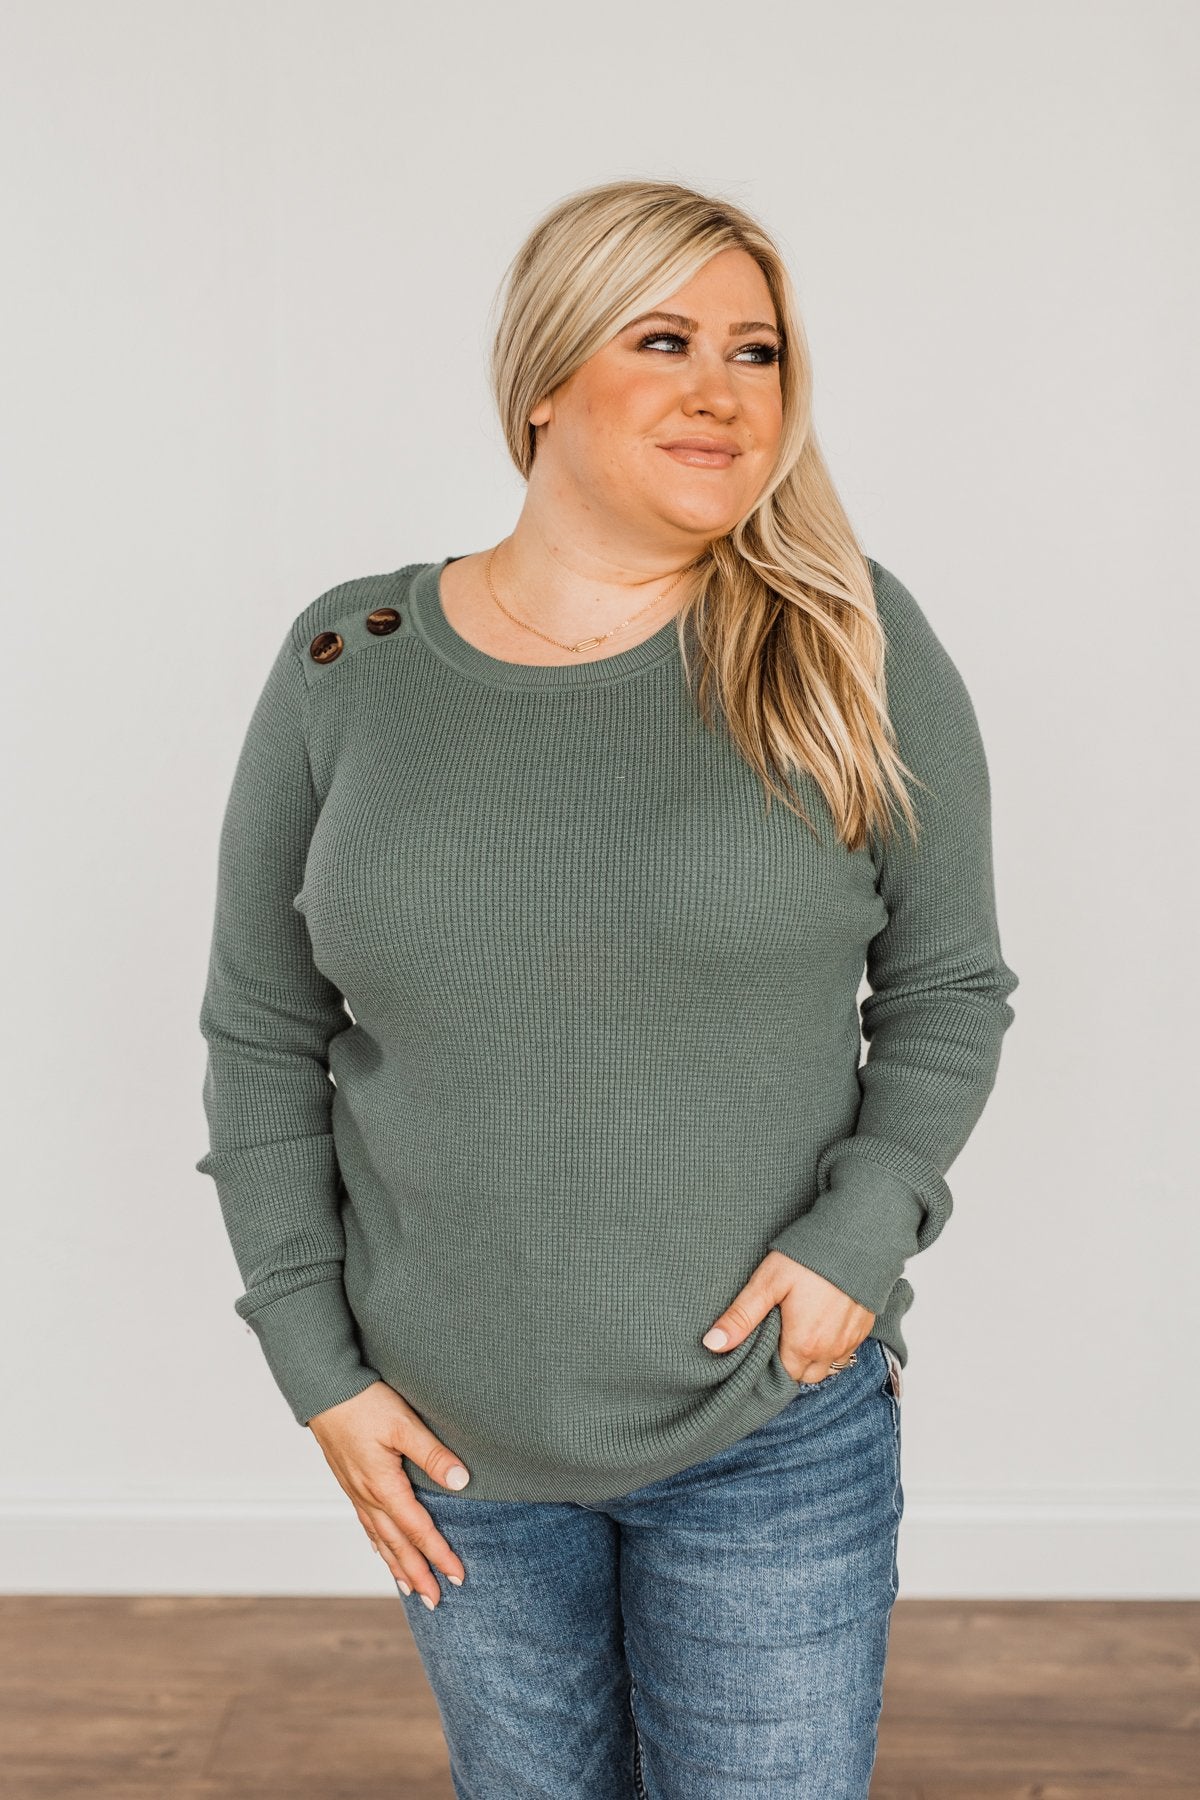 Reasons To Smile Long Sleeve Knit Top- Dusty Jade